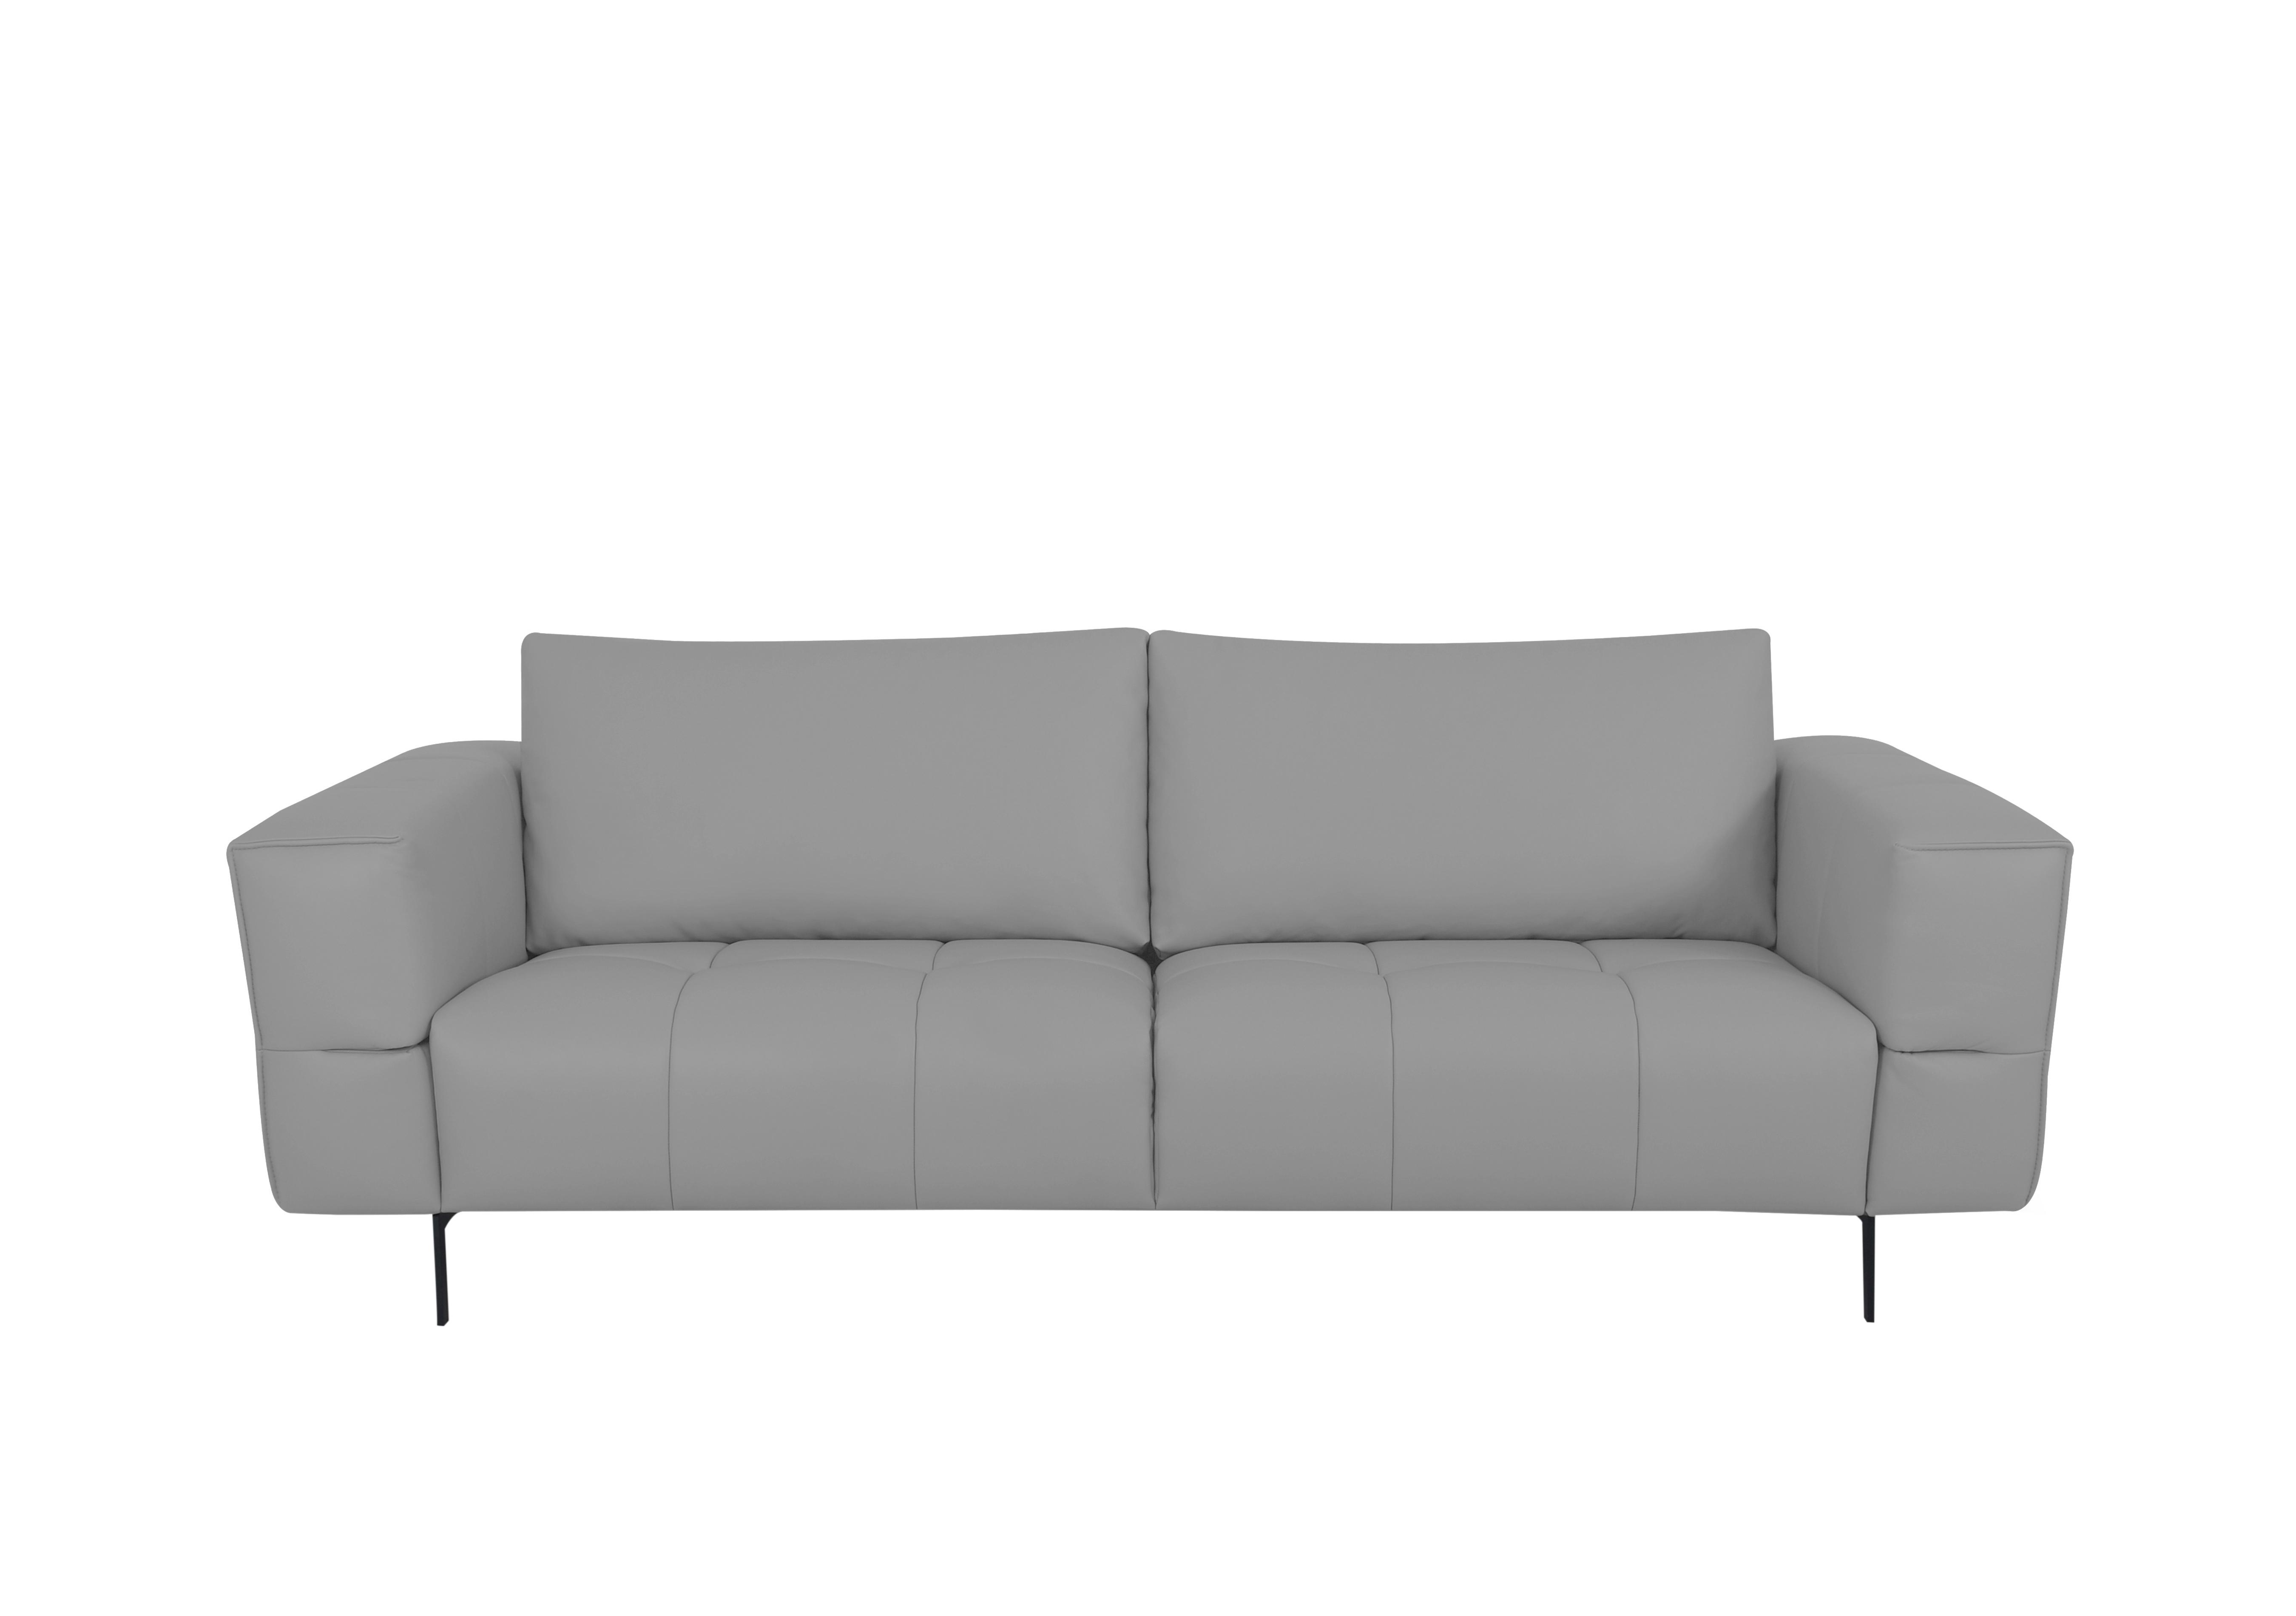 Lawson 3 Seater Leather Sofa in Np-516e Light Grey on Furniture Village